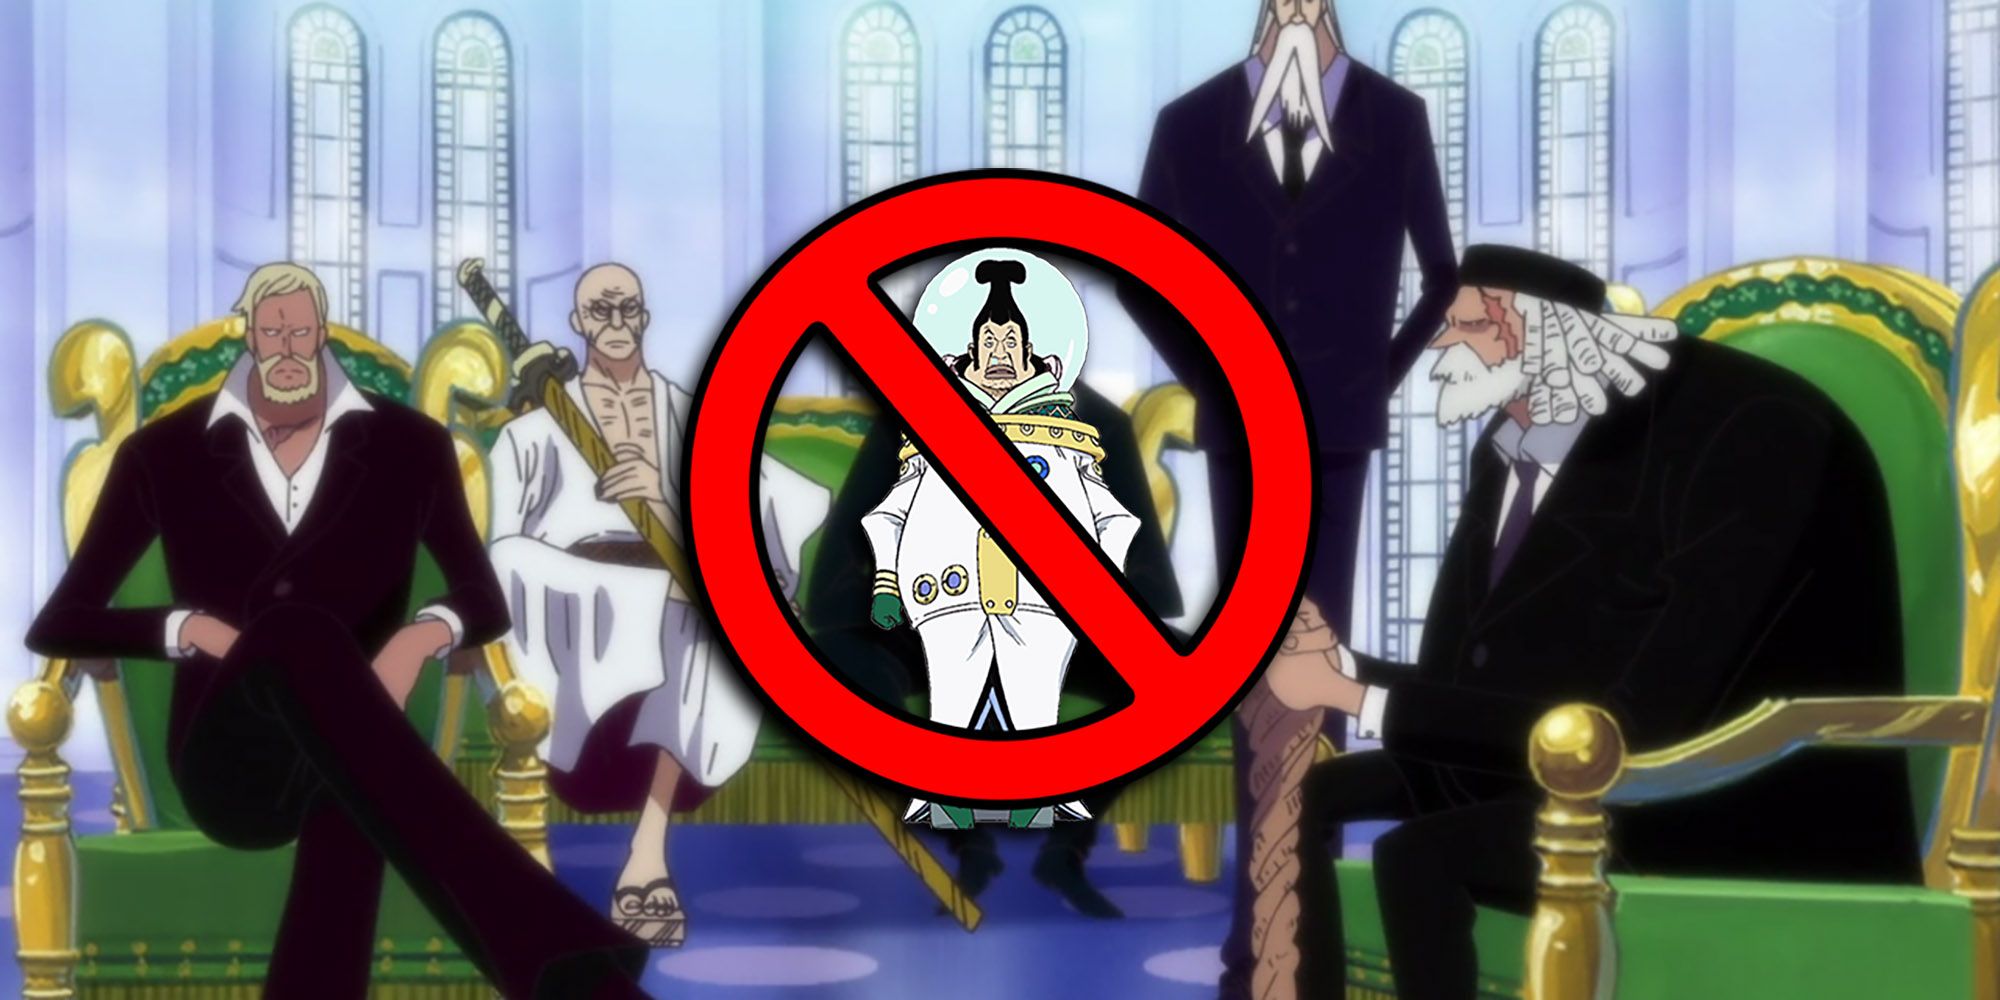 One Piece - Five Elders Sitting In Room Of Authority With Saint Charlos Style Of Dress Overlaid On Top With A Denied Symbol